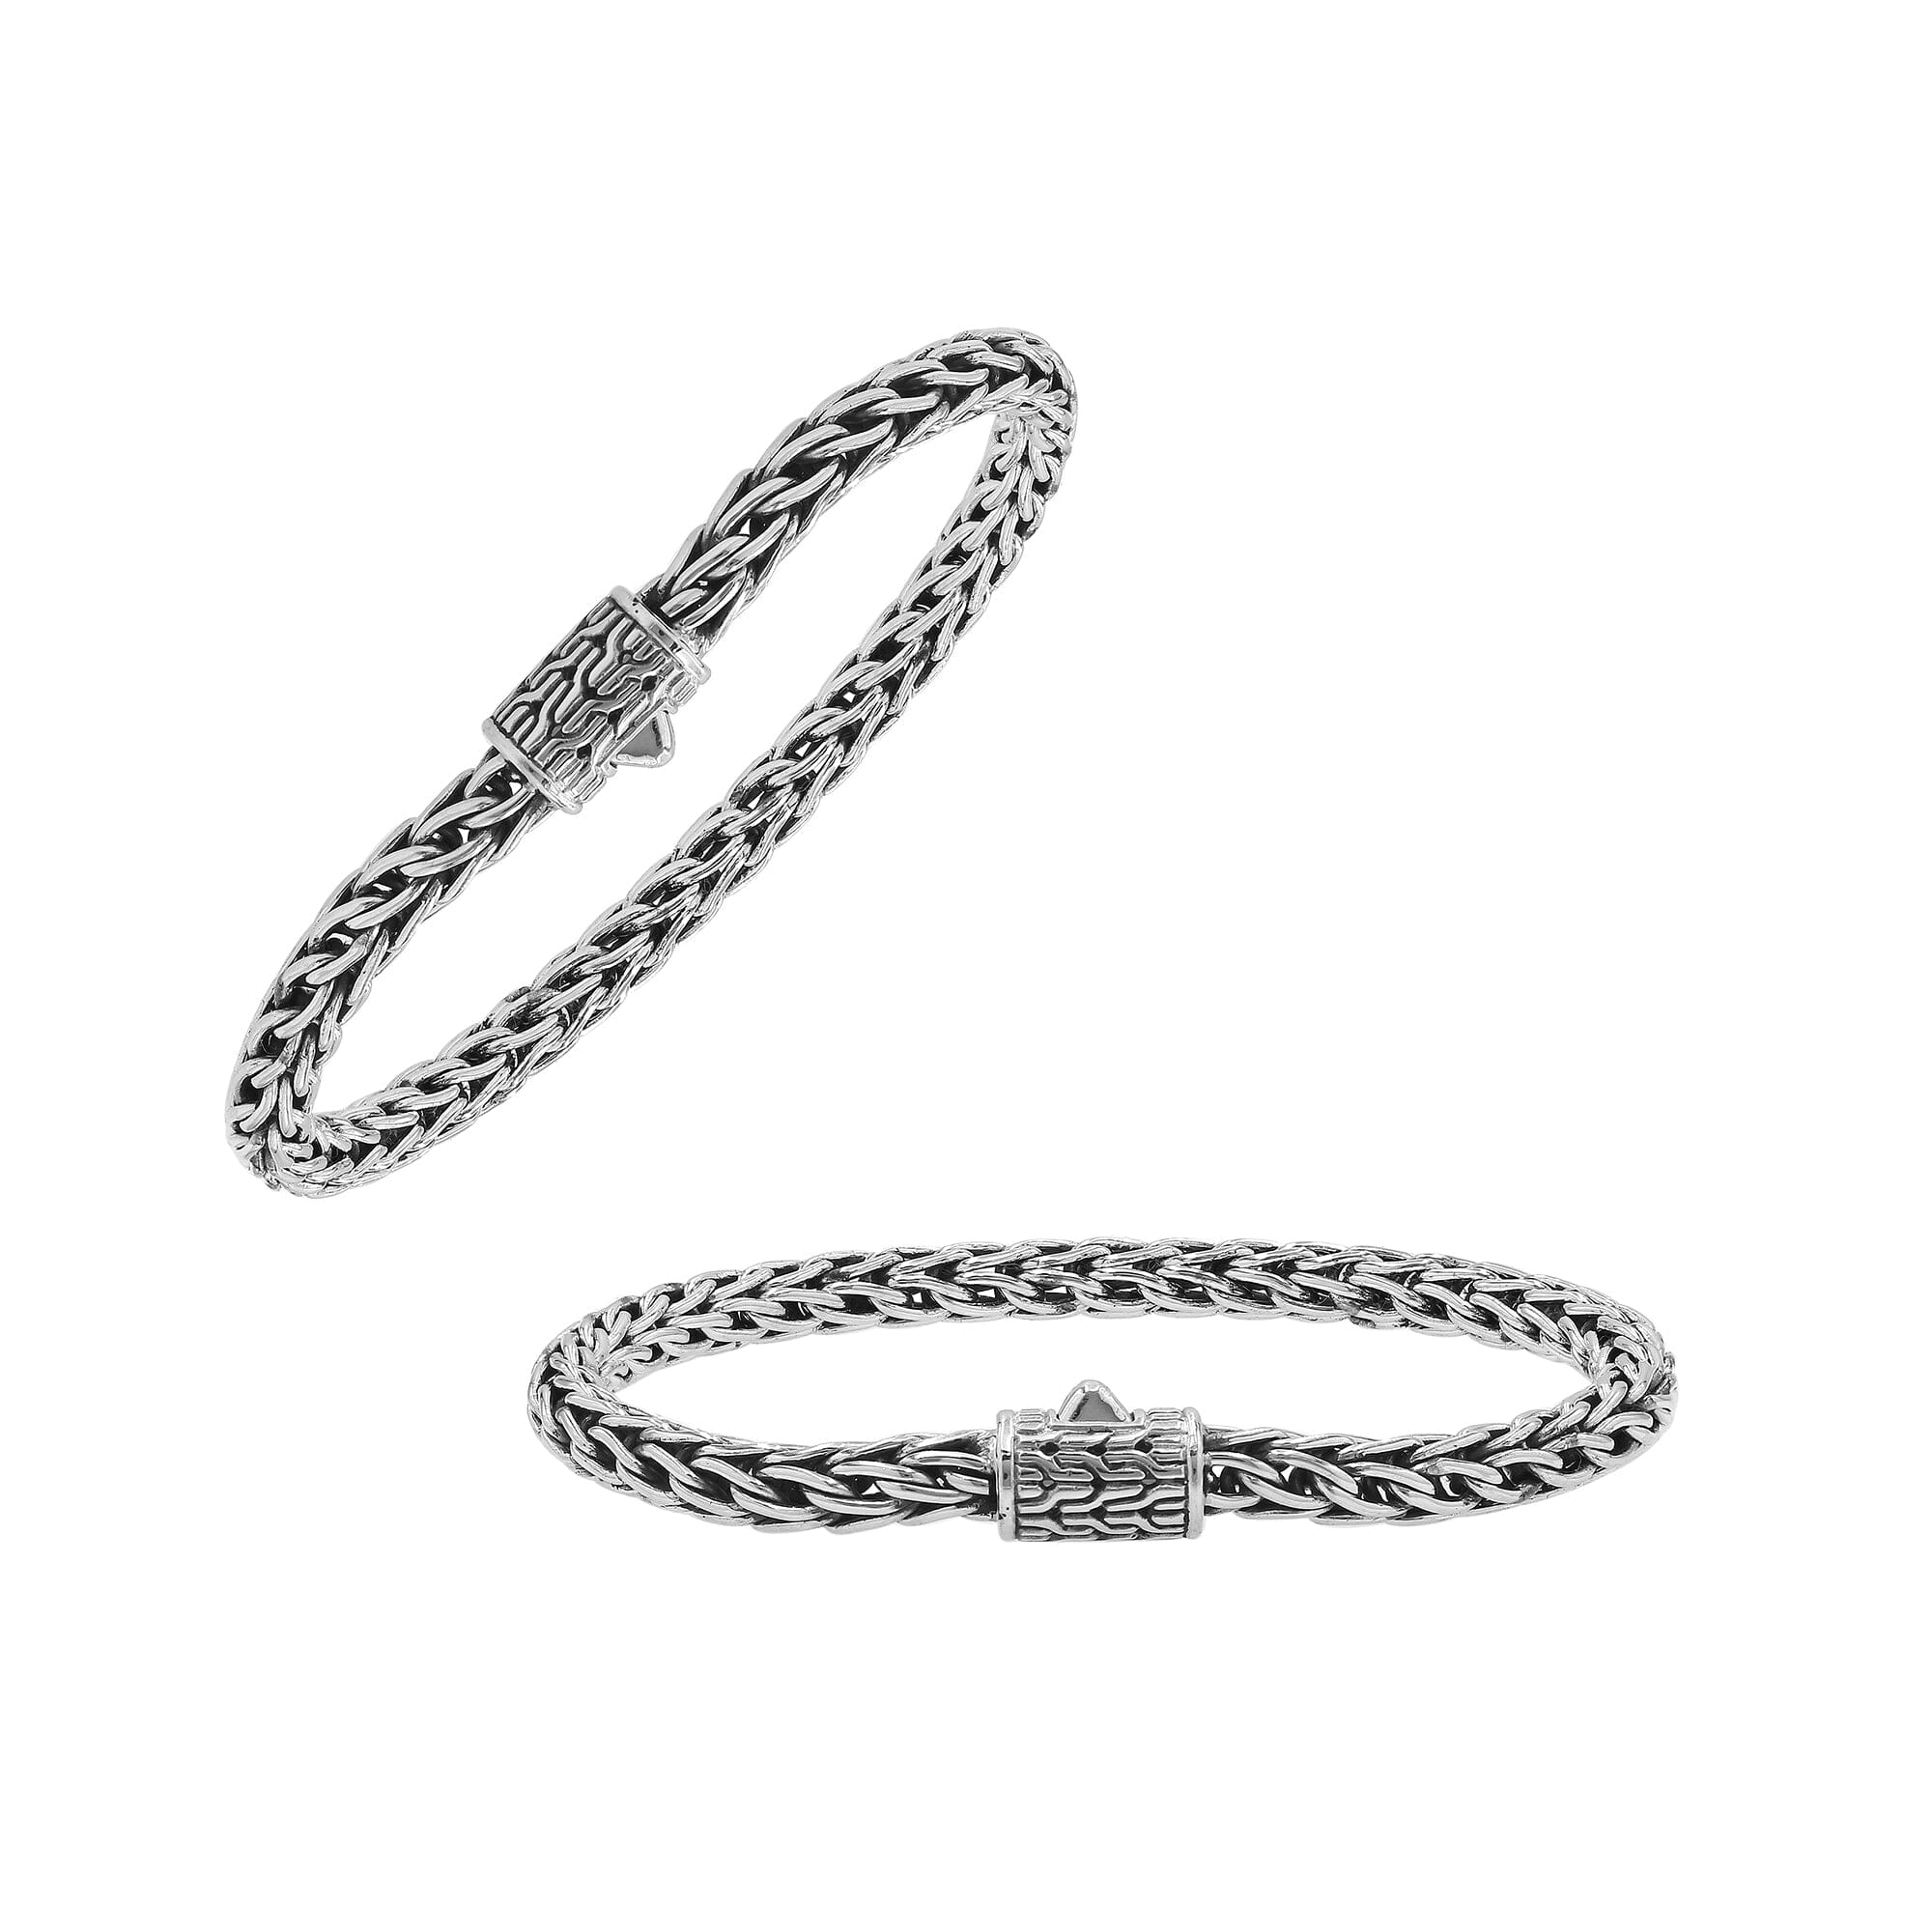 AB-6281-S-8" Sterling Silver Bracelet With Plain Silver